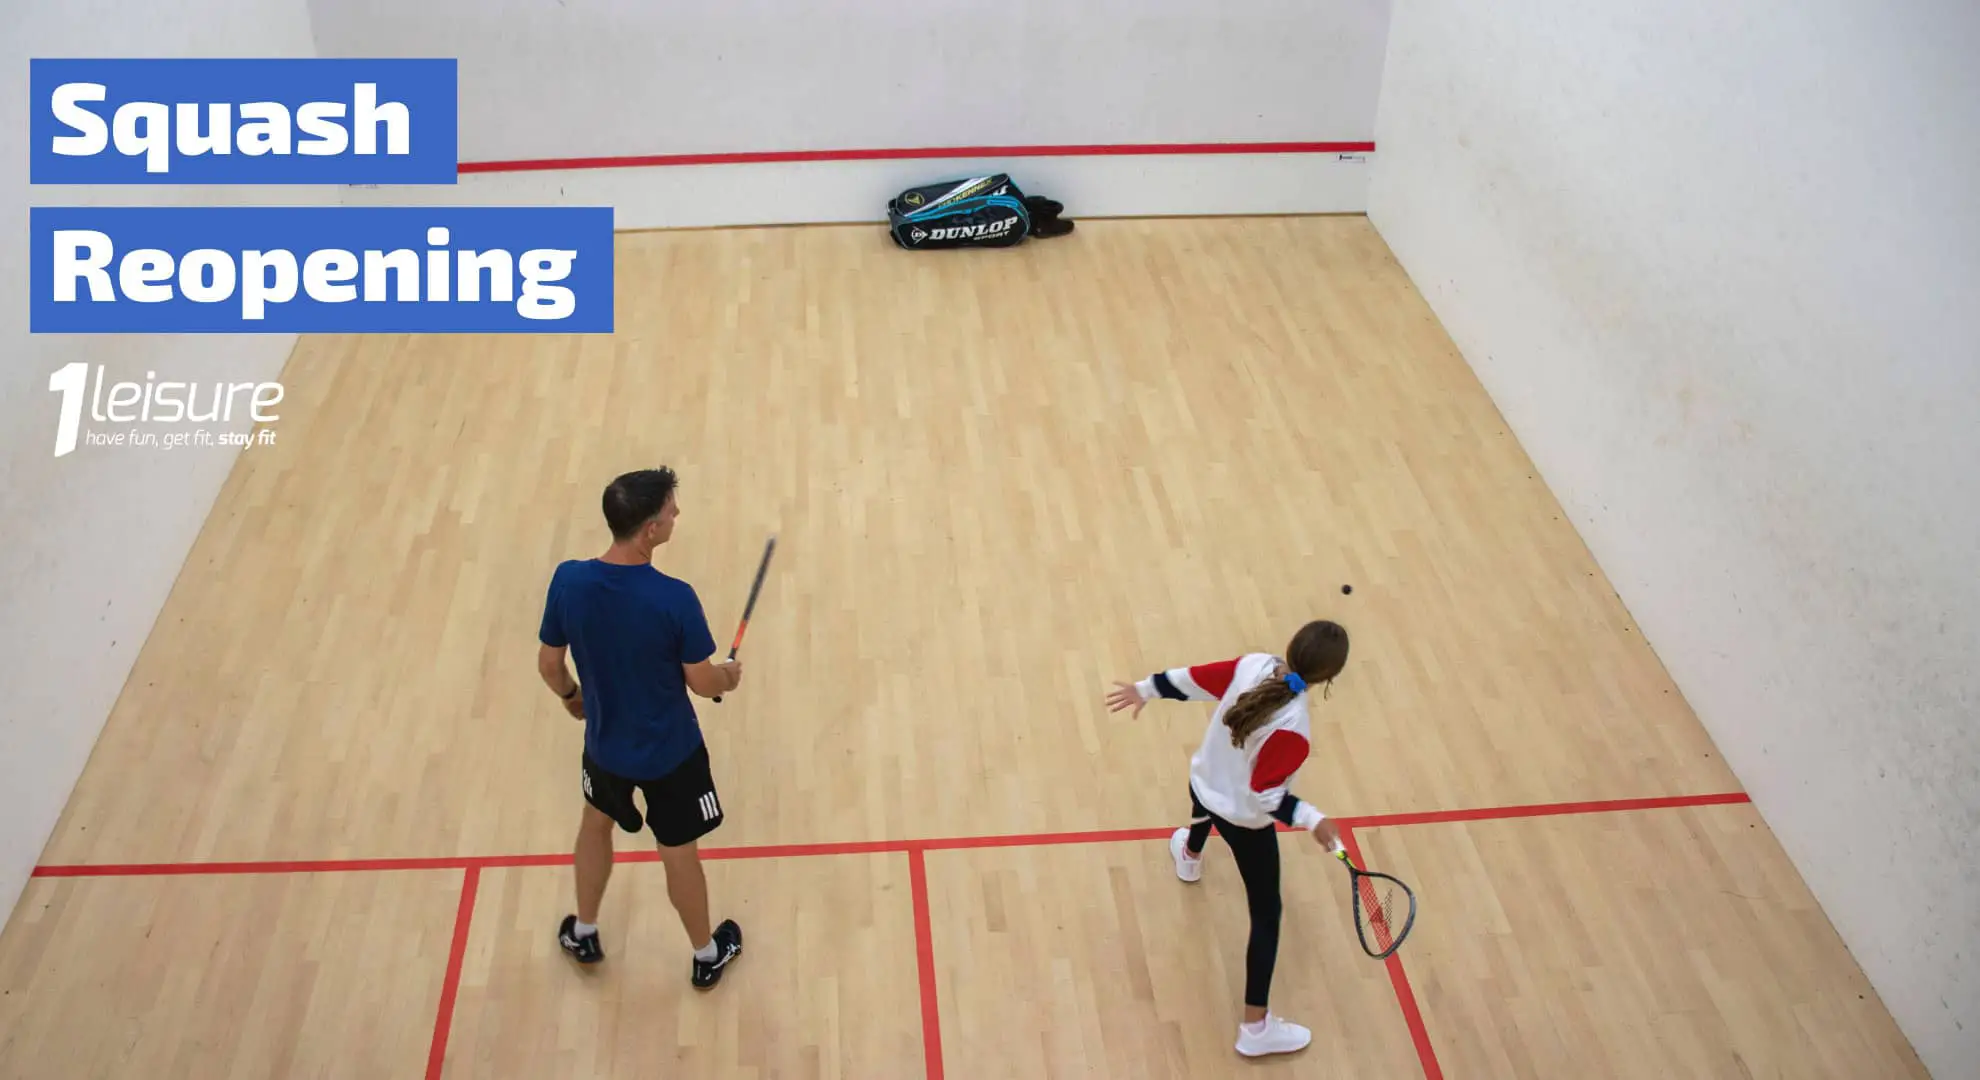 Two people playing squash at the squash court